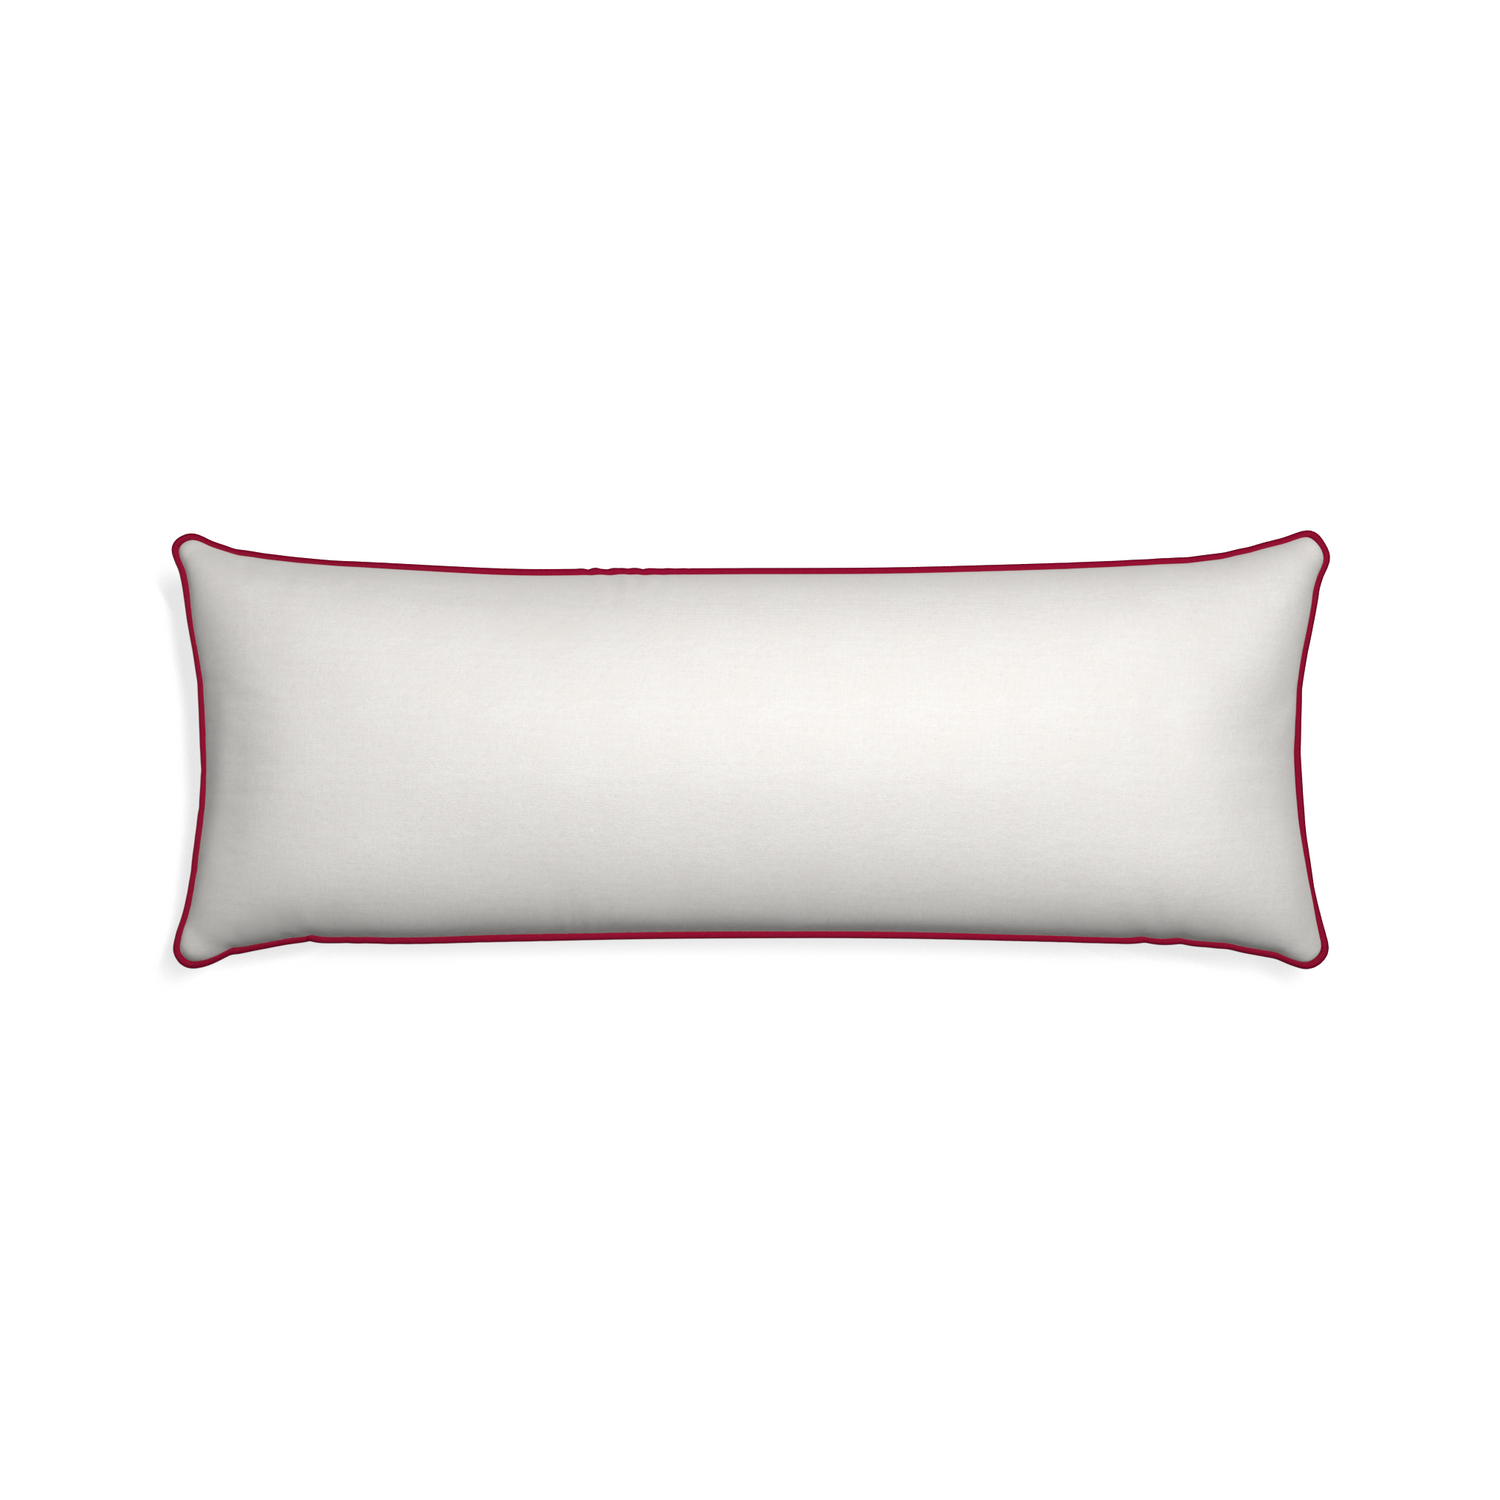 Xl-lumbar flour custom pillow with raspberry piping on white background